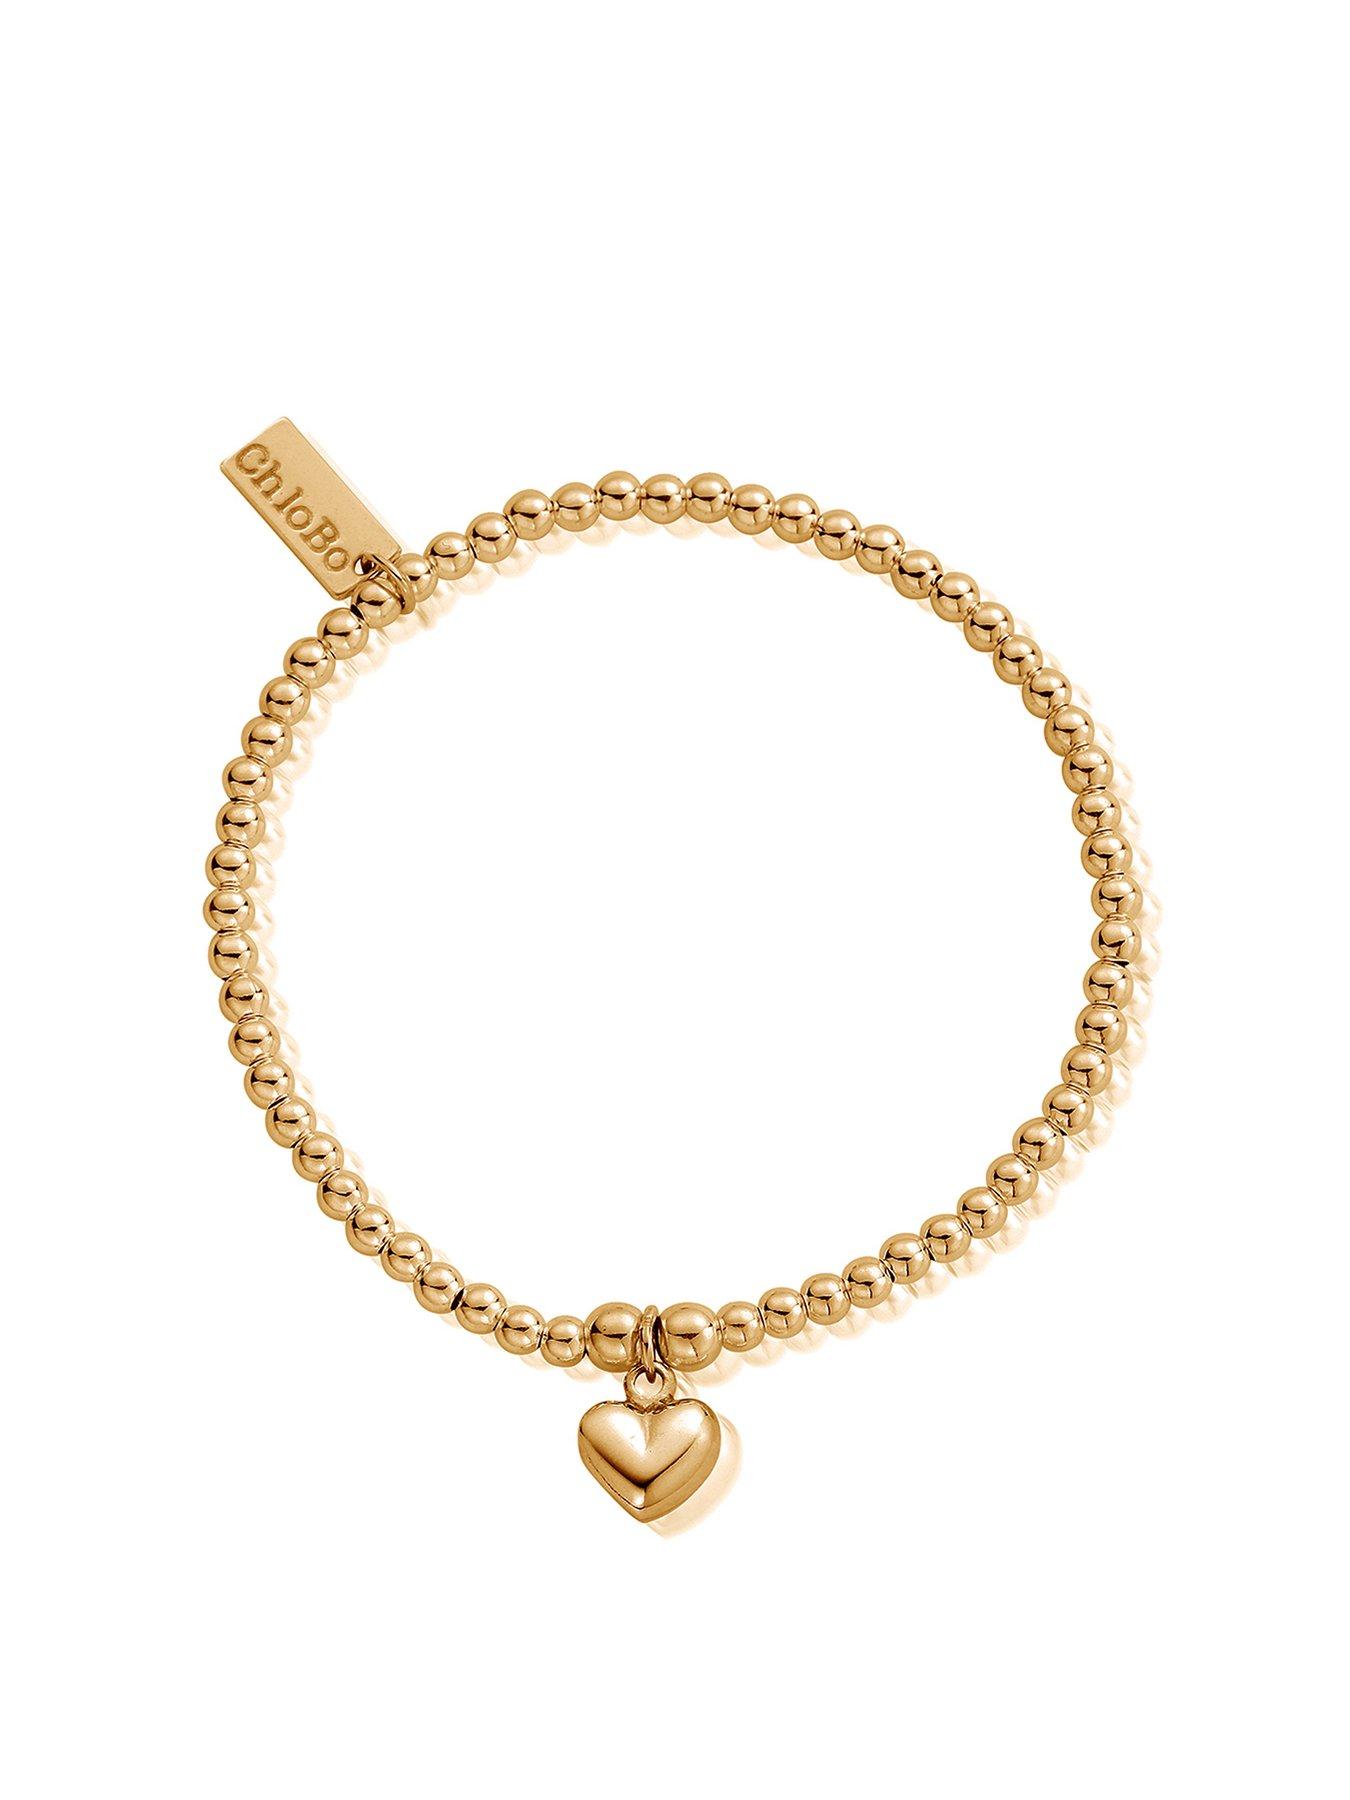 Jewellery & watches Gold Cute Charm Puffed Heart Bracelet Gold Plated 925 Sterling Silver